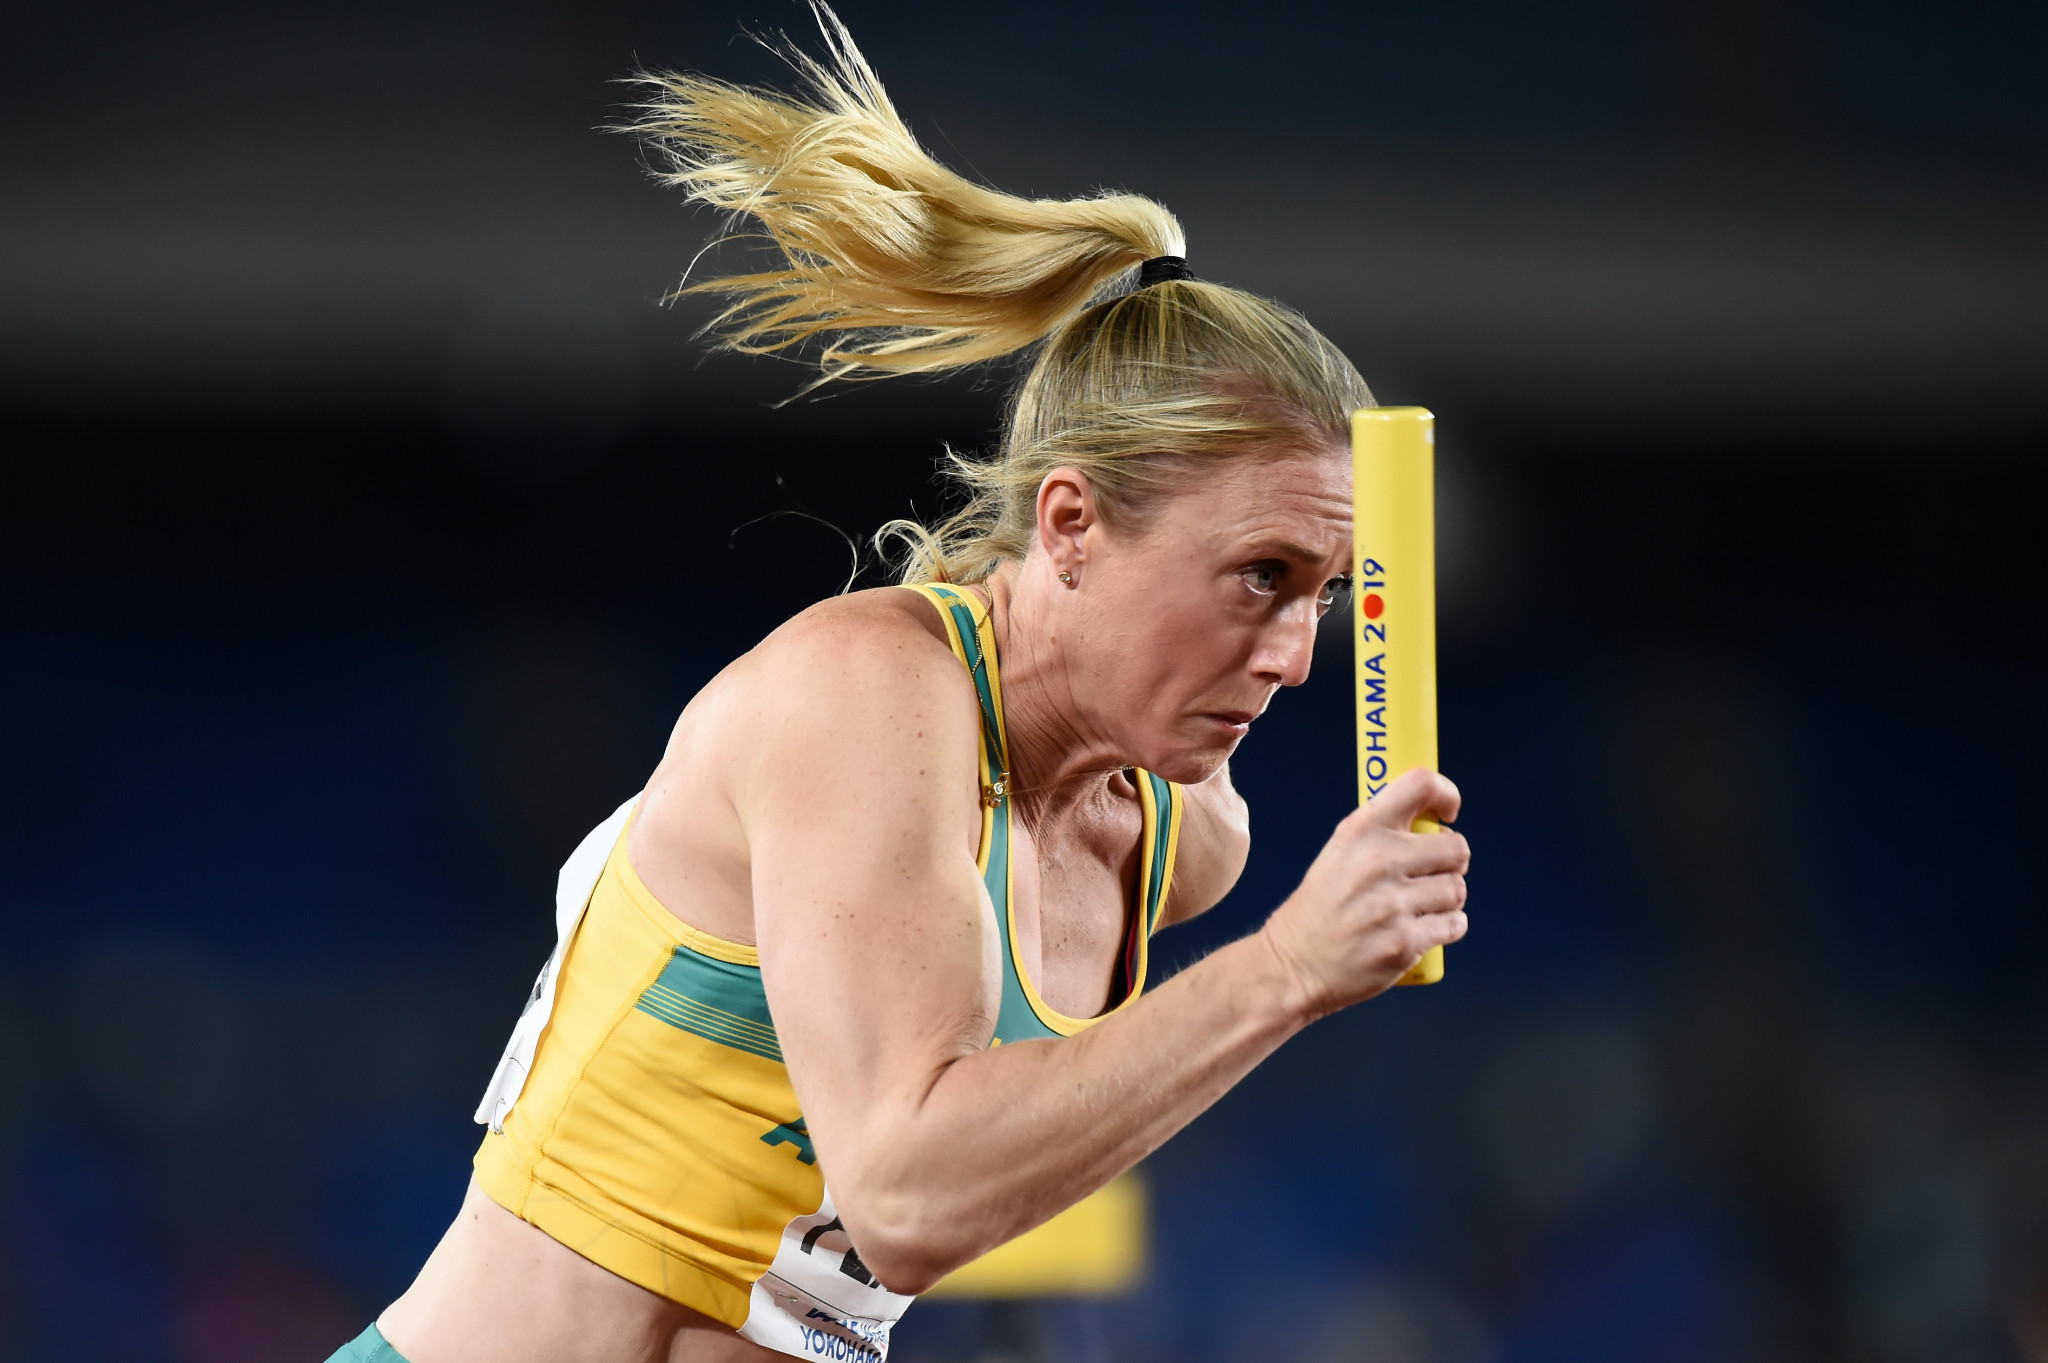 Sally Pearson was originally advertised as competing but has reportedly withdrawn ©Getty Images